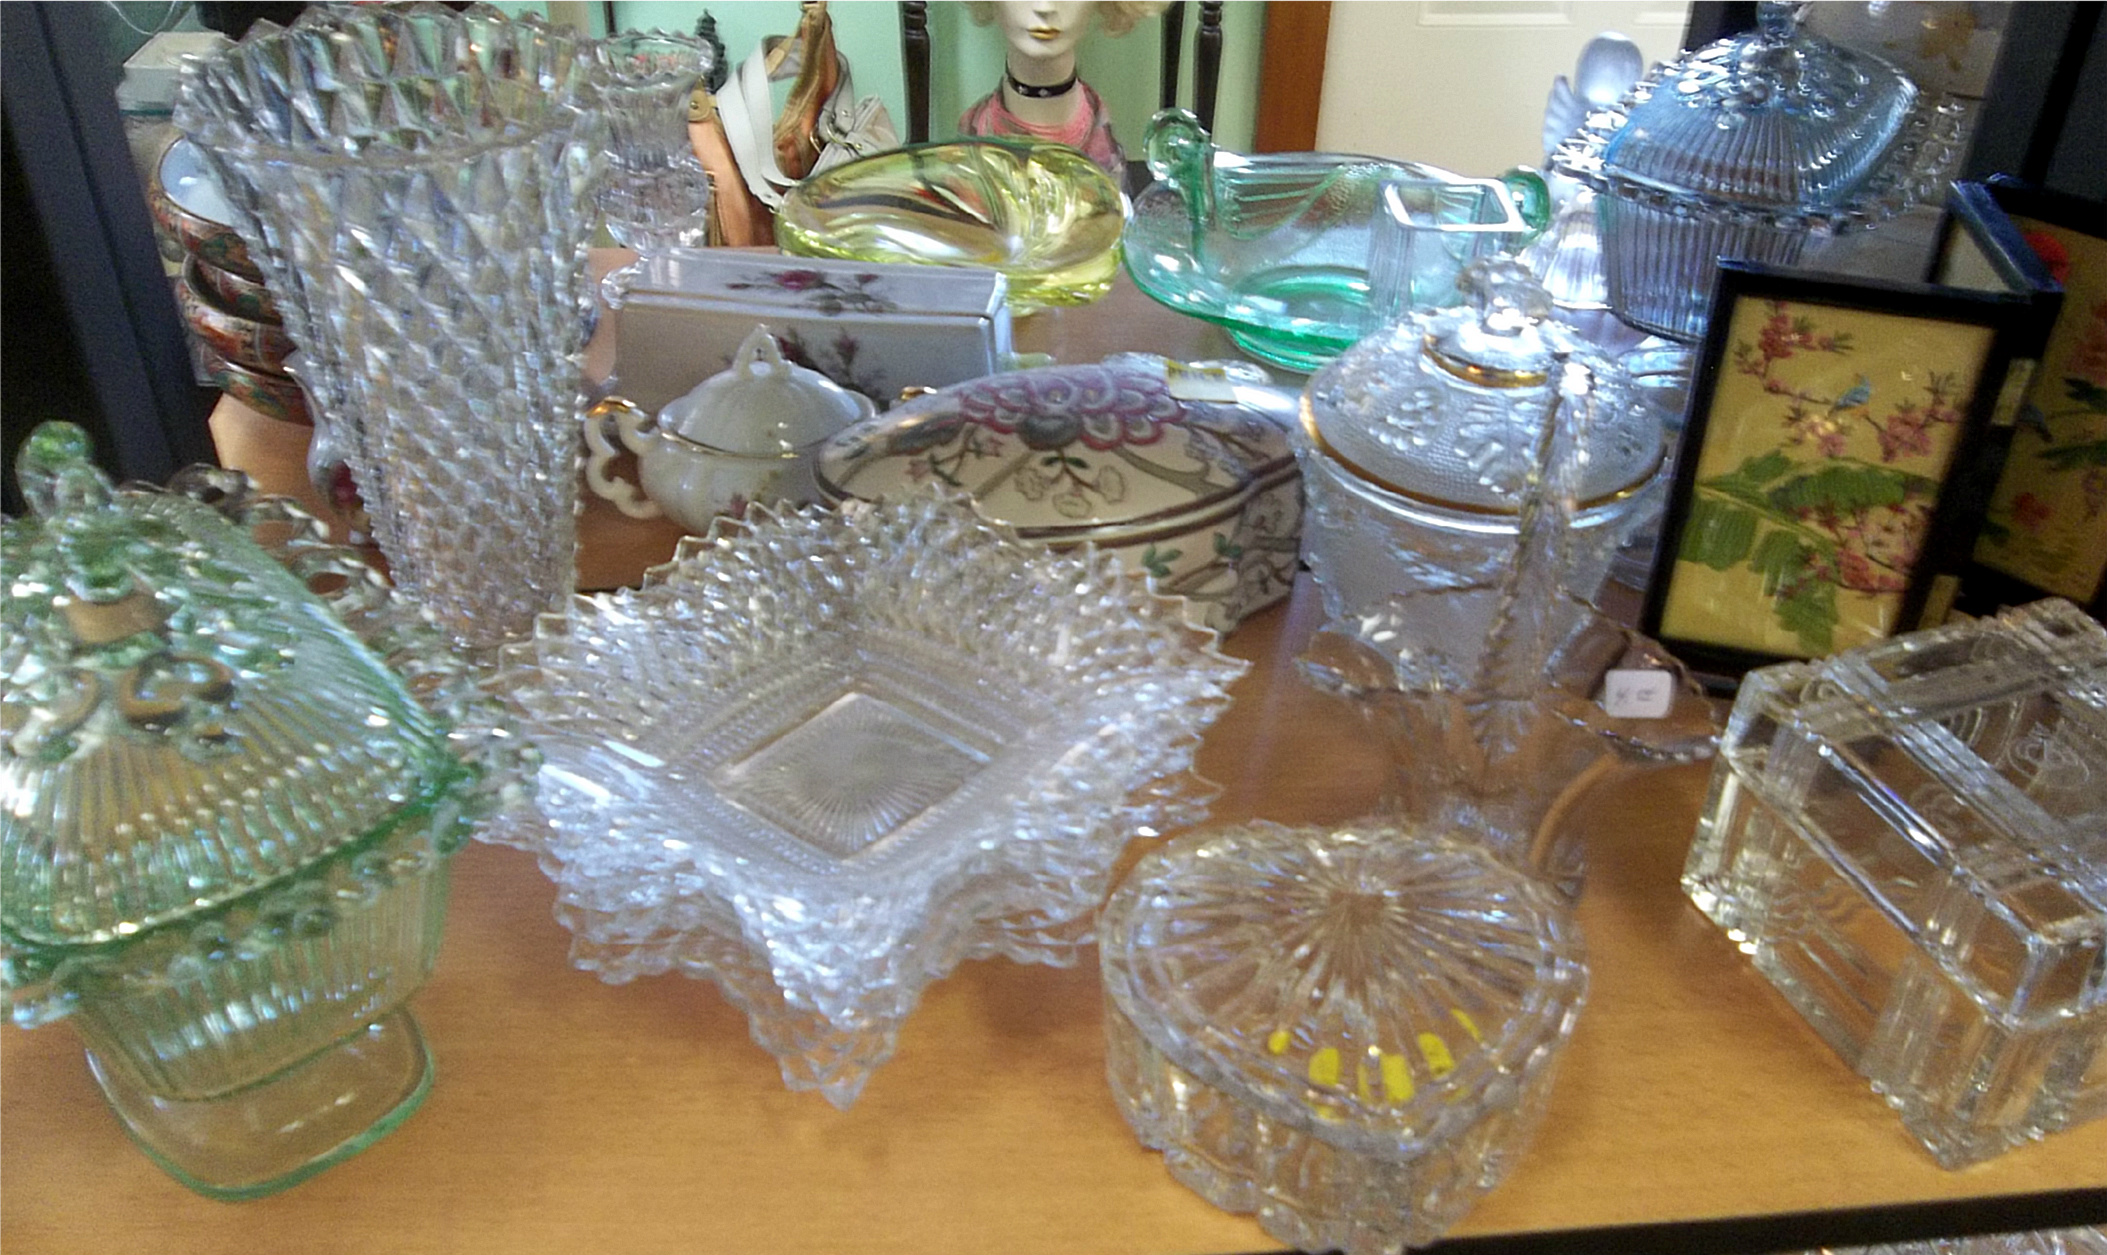 collectibles and home decor for sale at New To You Shop in Unity Maine